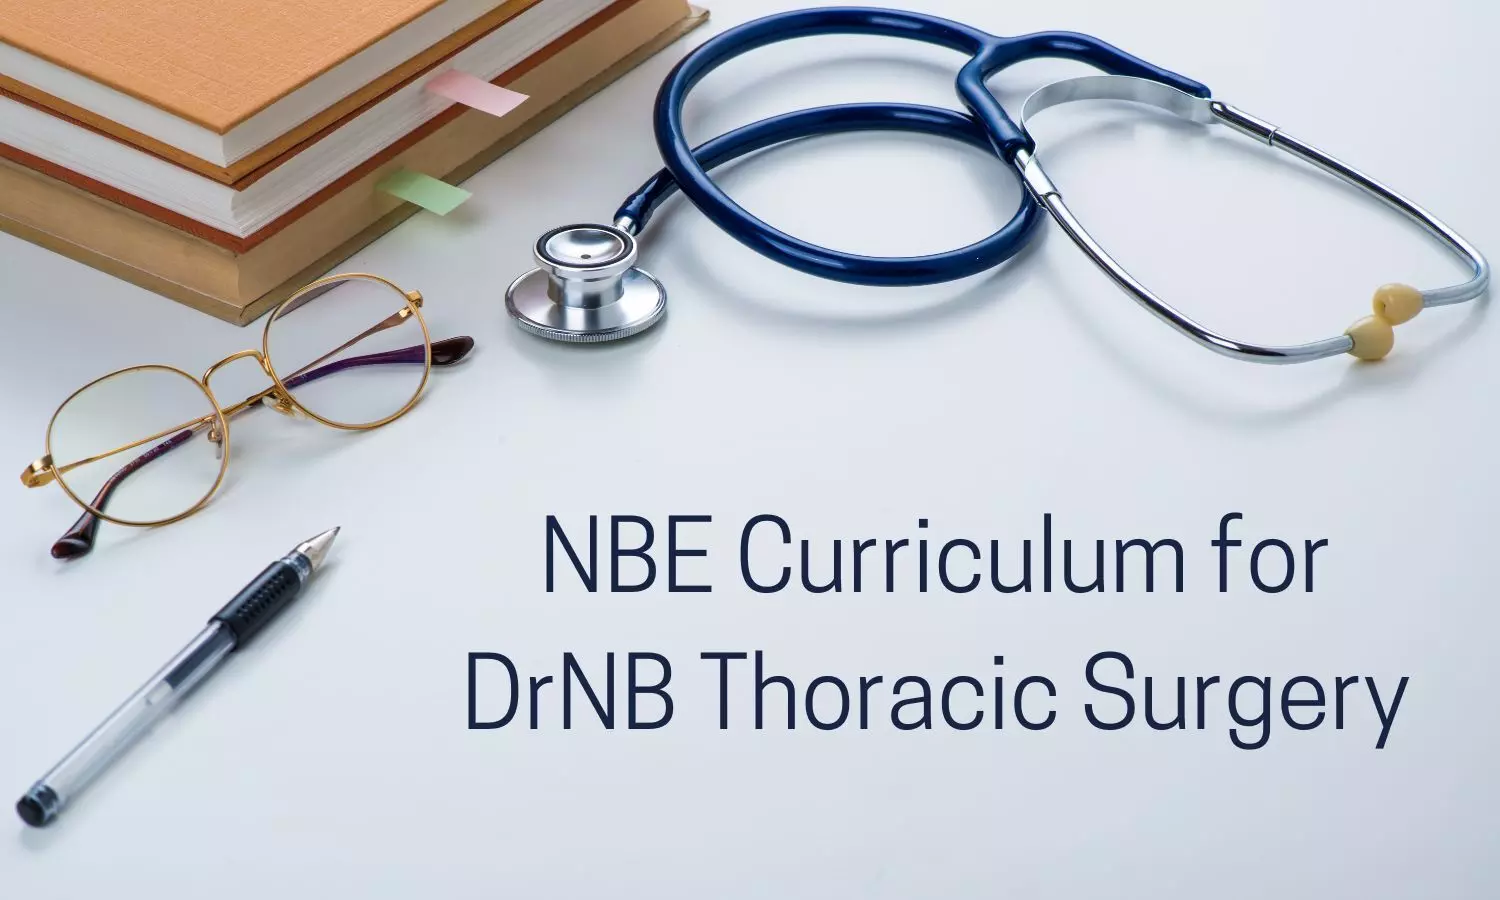 DrNB Thoracic Surgery In India: Check Out NBE Released Curriculum